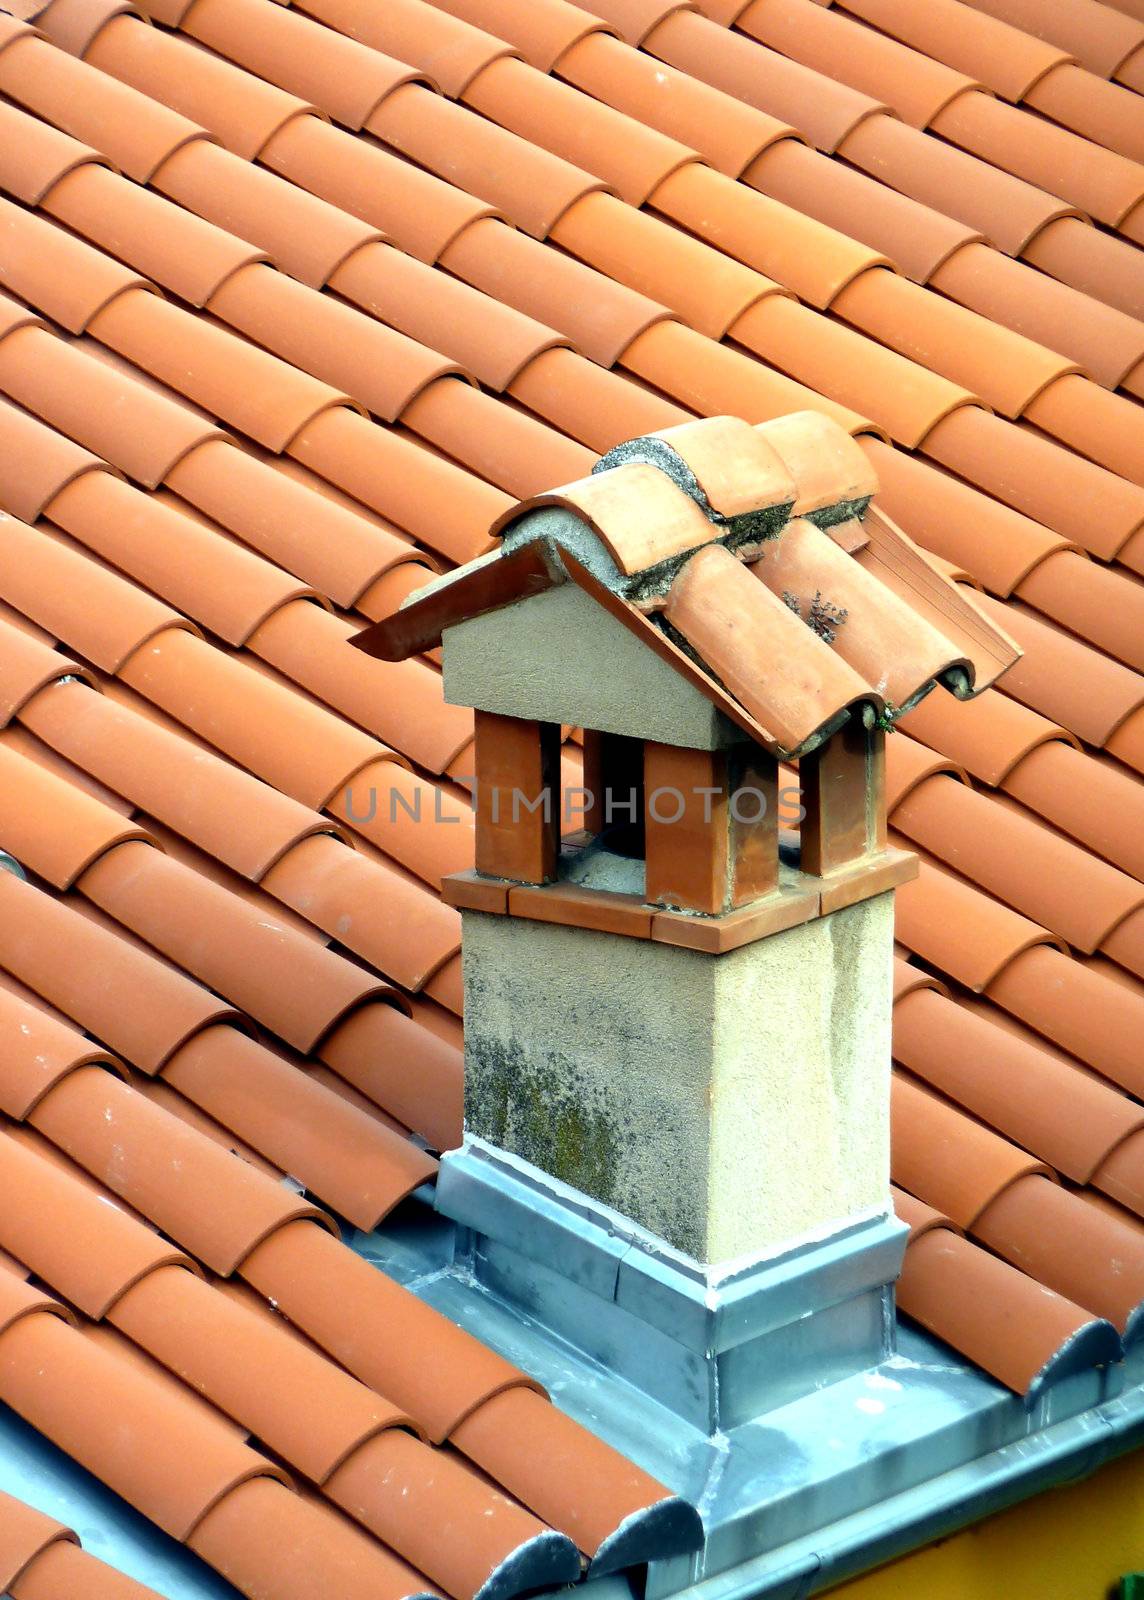 Chimney on a roof made of red tiles